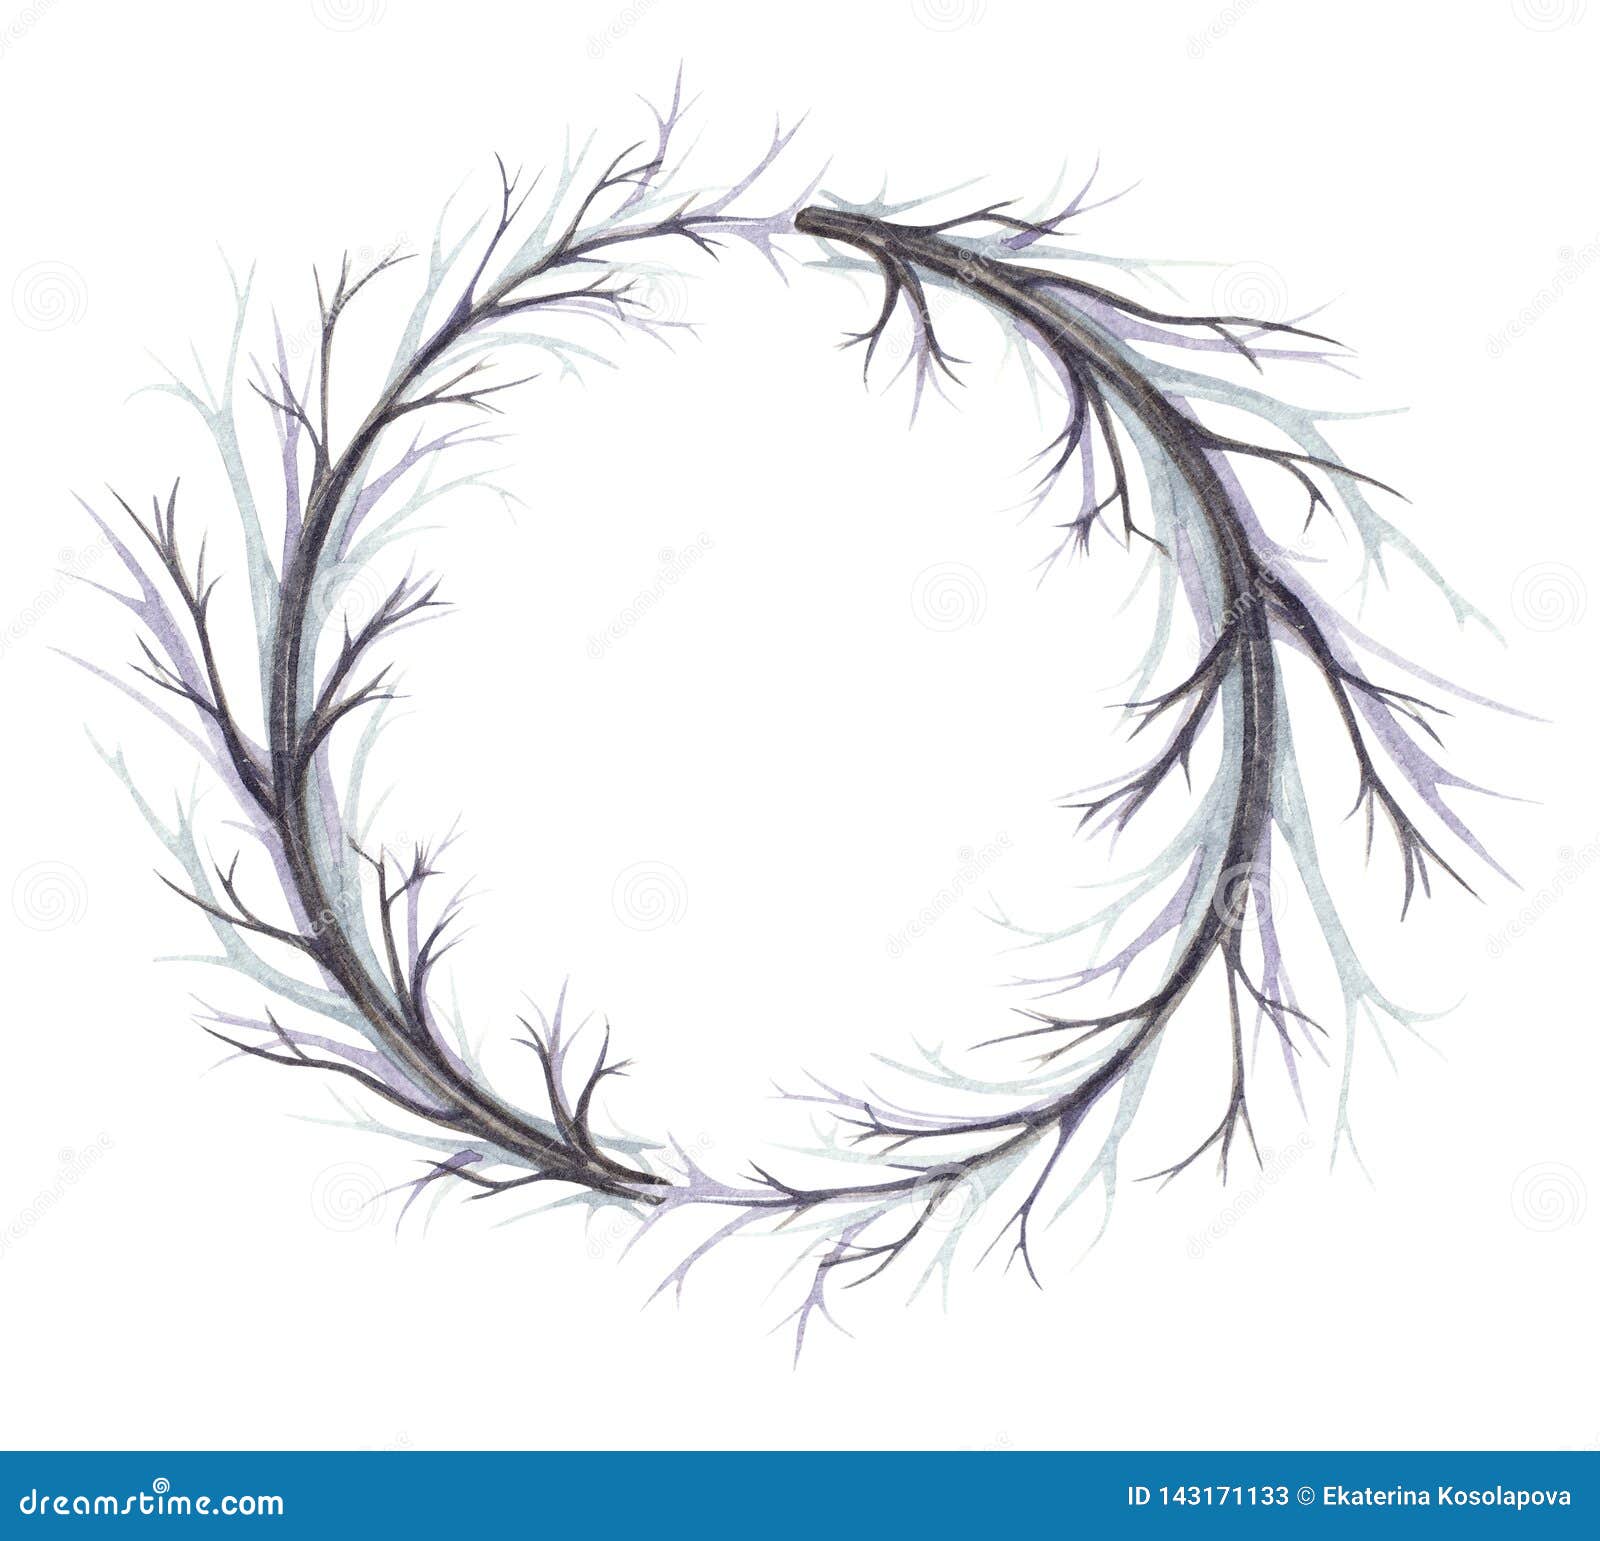 Watercolor Wreath From Gloomy Branches Stock Illustration